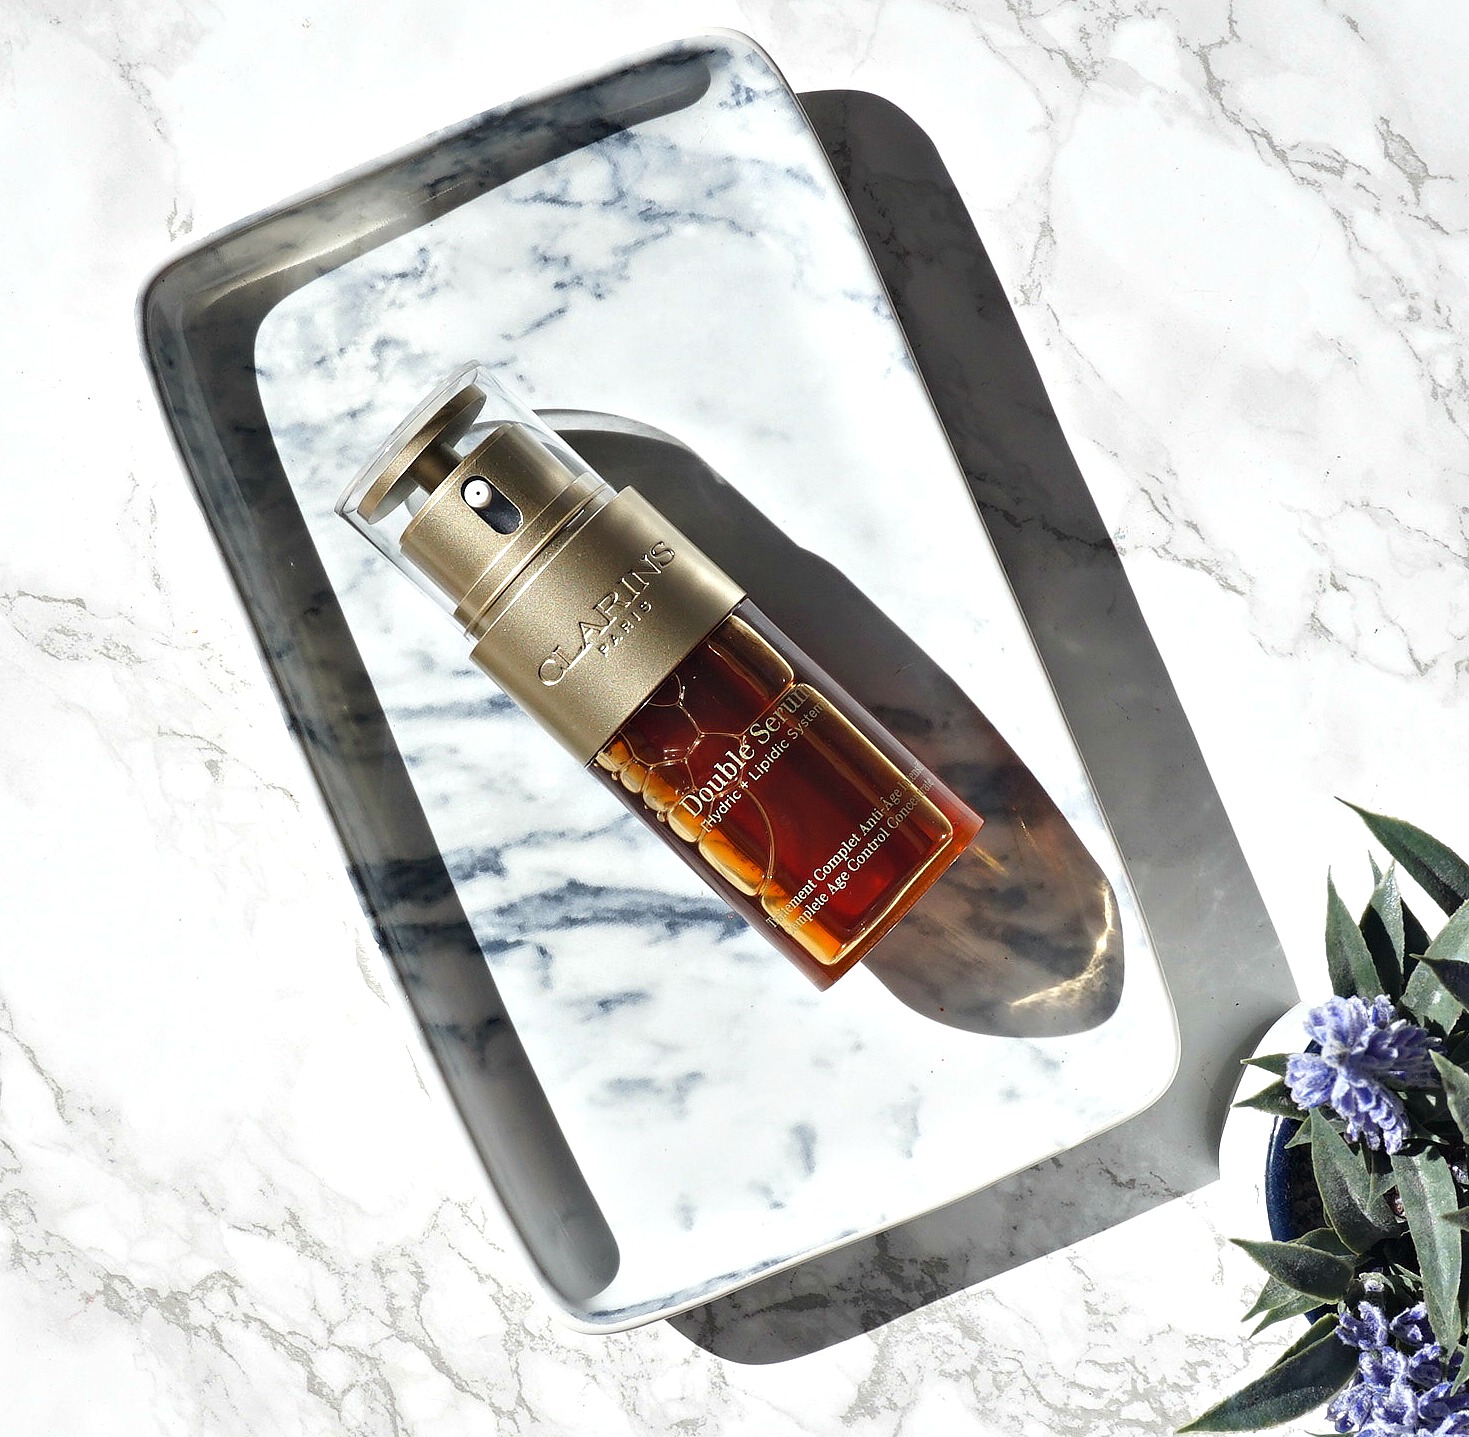 Clarins Double Serum review